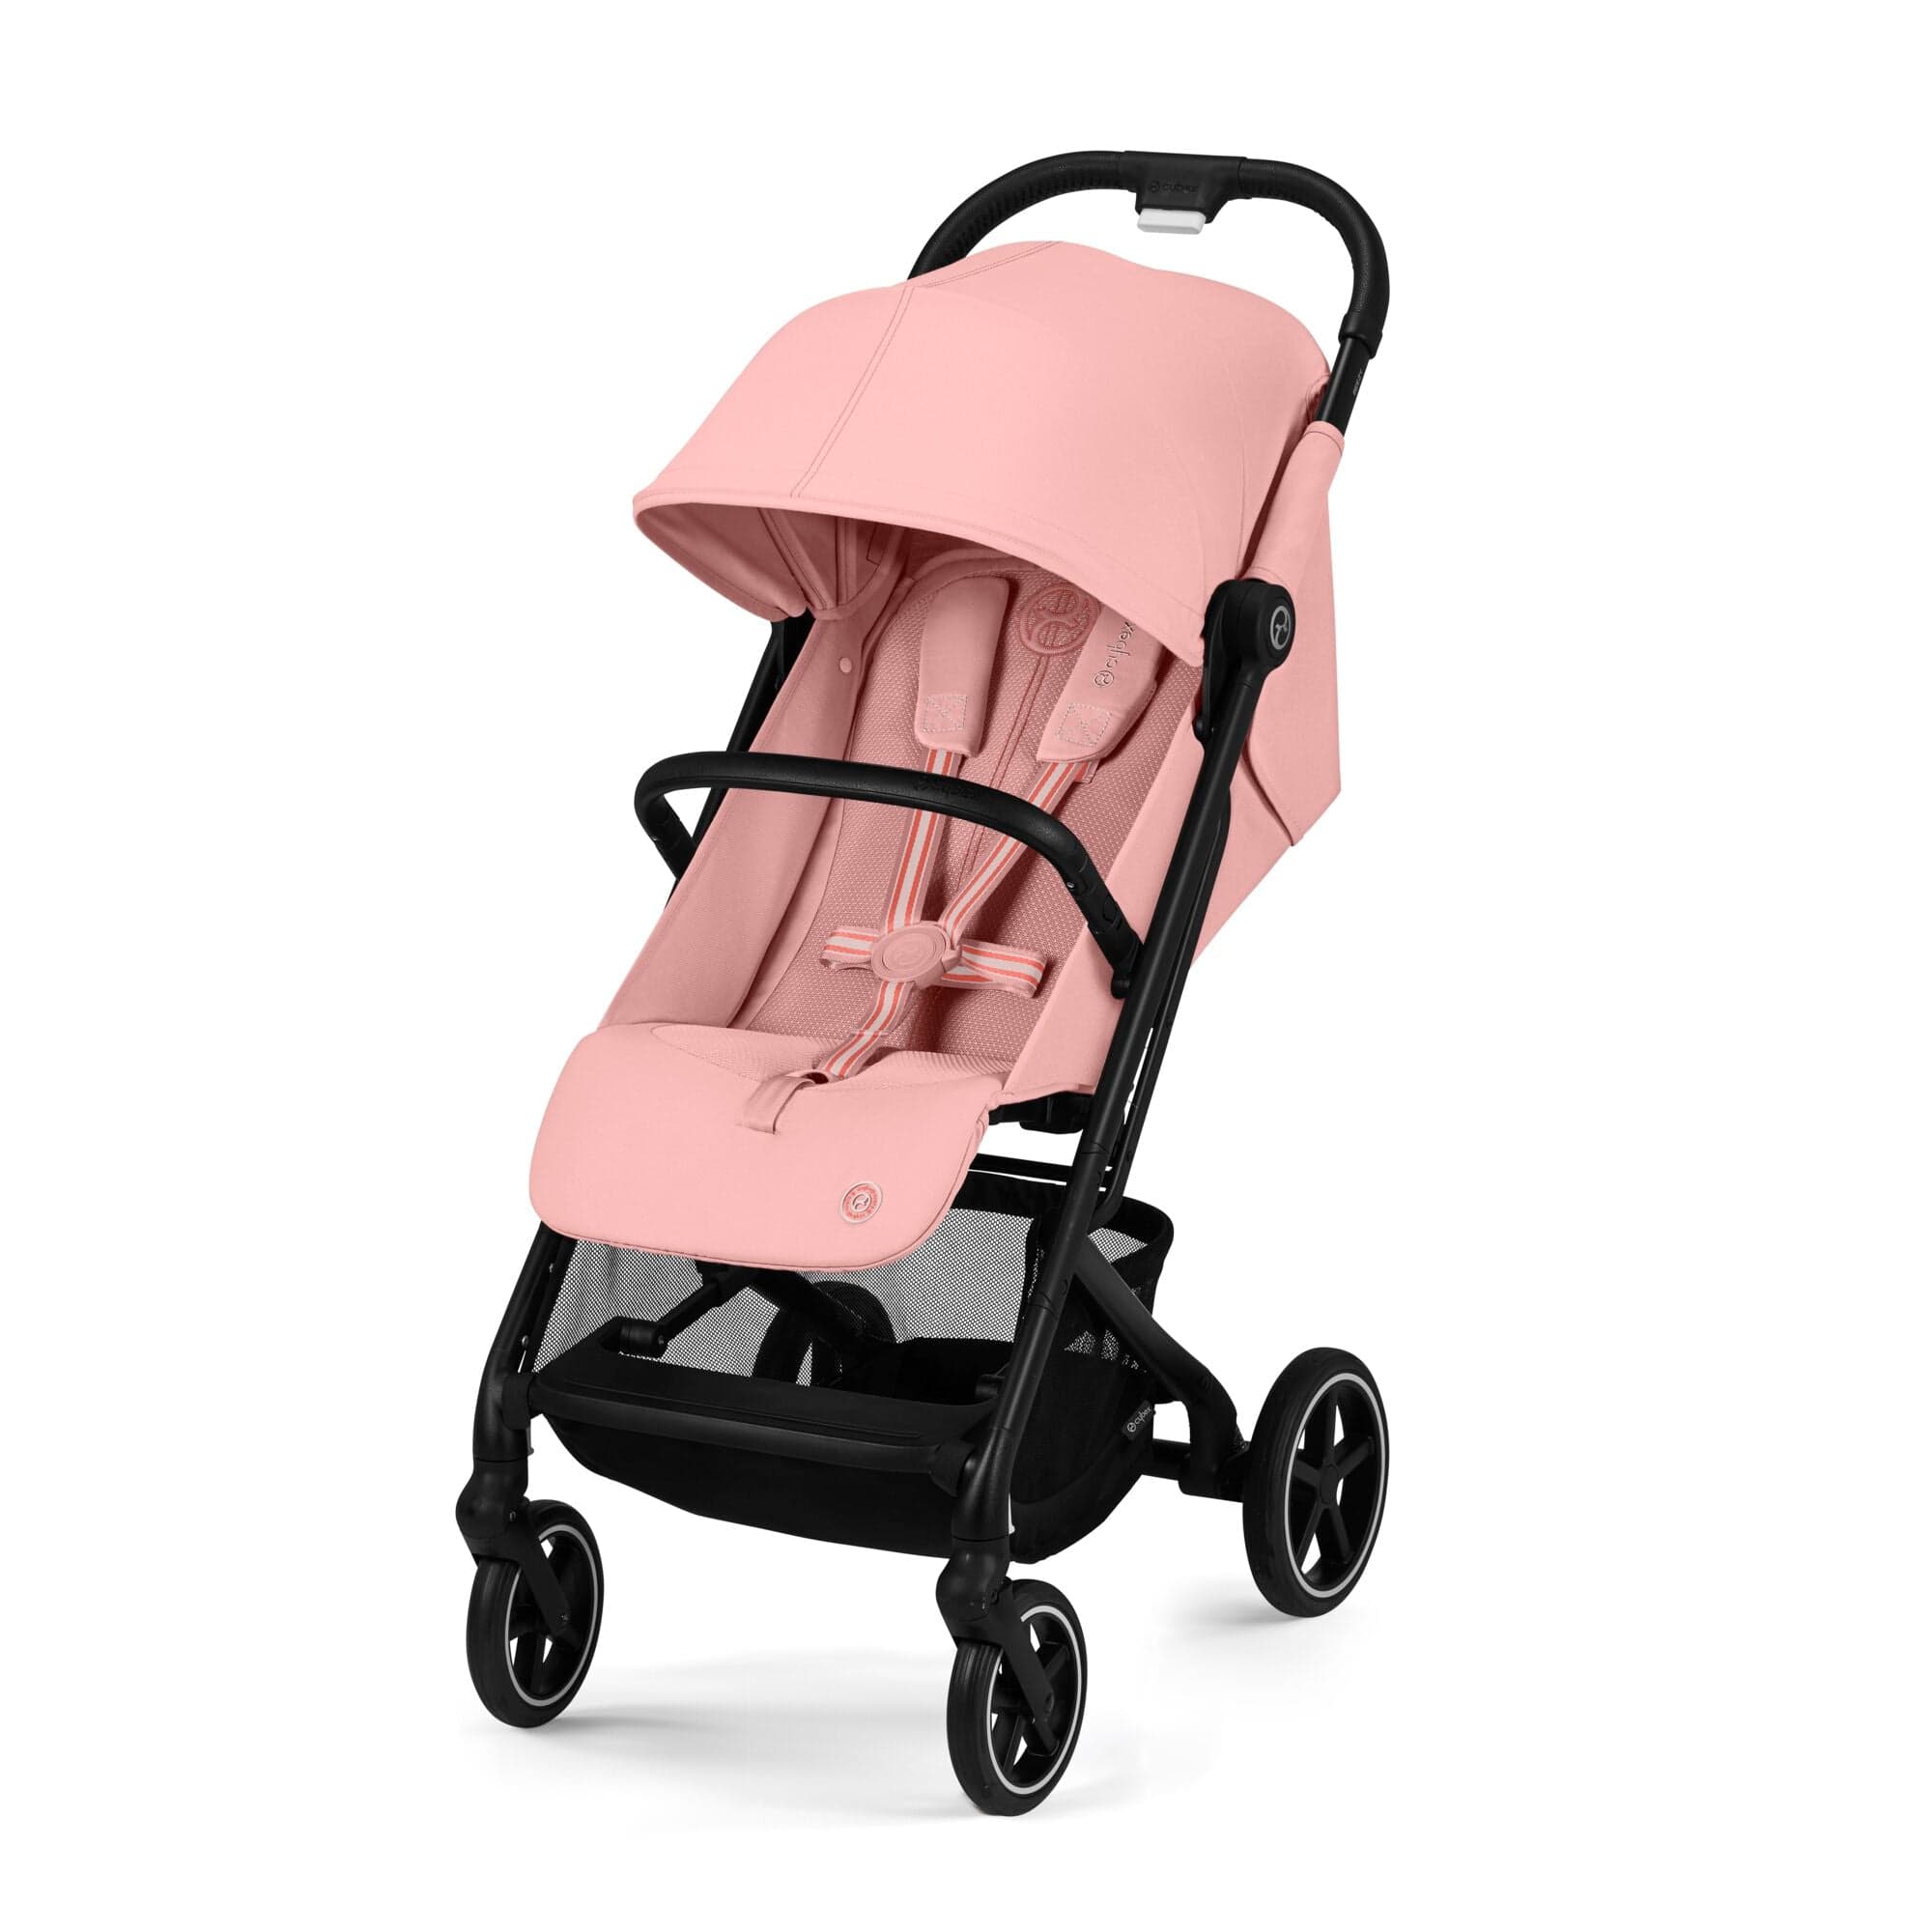 Cybex Beezy in Candy Pink/Light Pink Pushchairs & Buggies 524000179 4063846450923